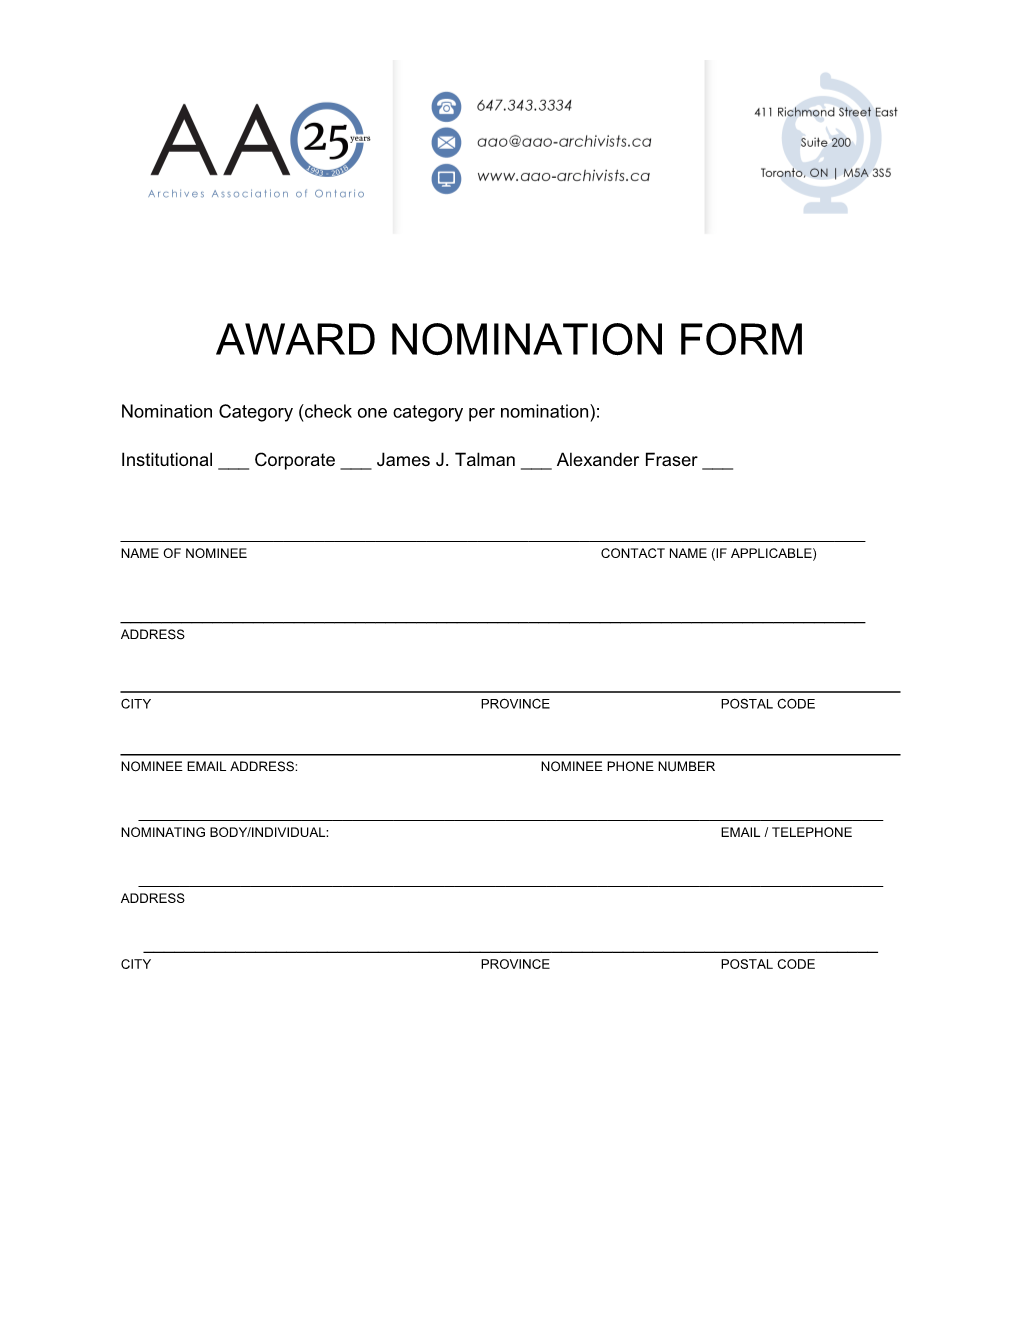 Nomination Category (Check One Category Per Nomination)